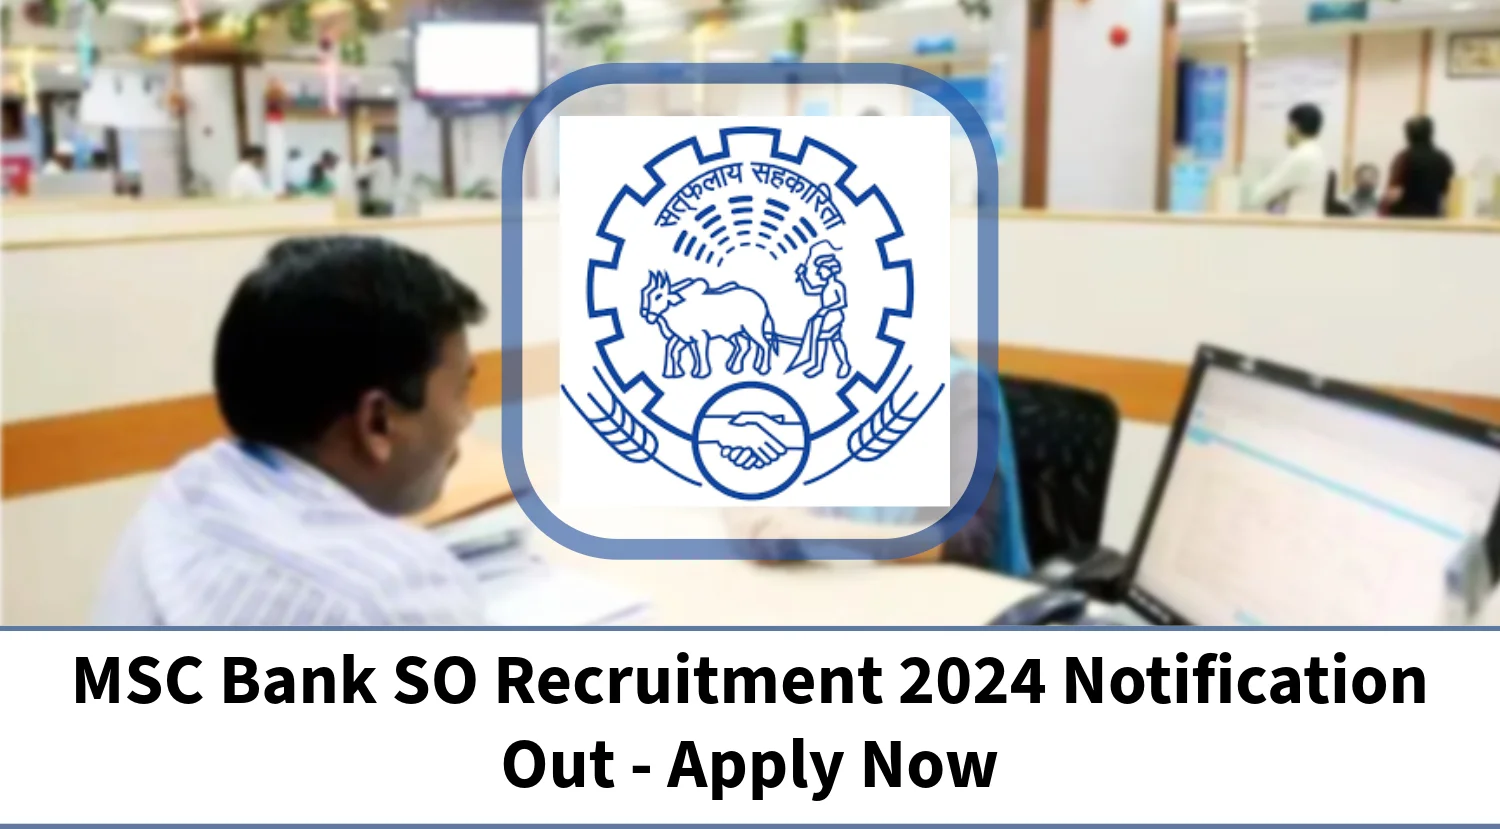 MSC Bank SO Recruitment 2024 Notification Out Apply Now